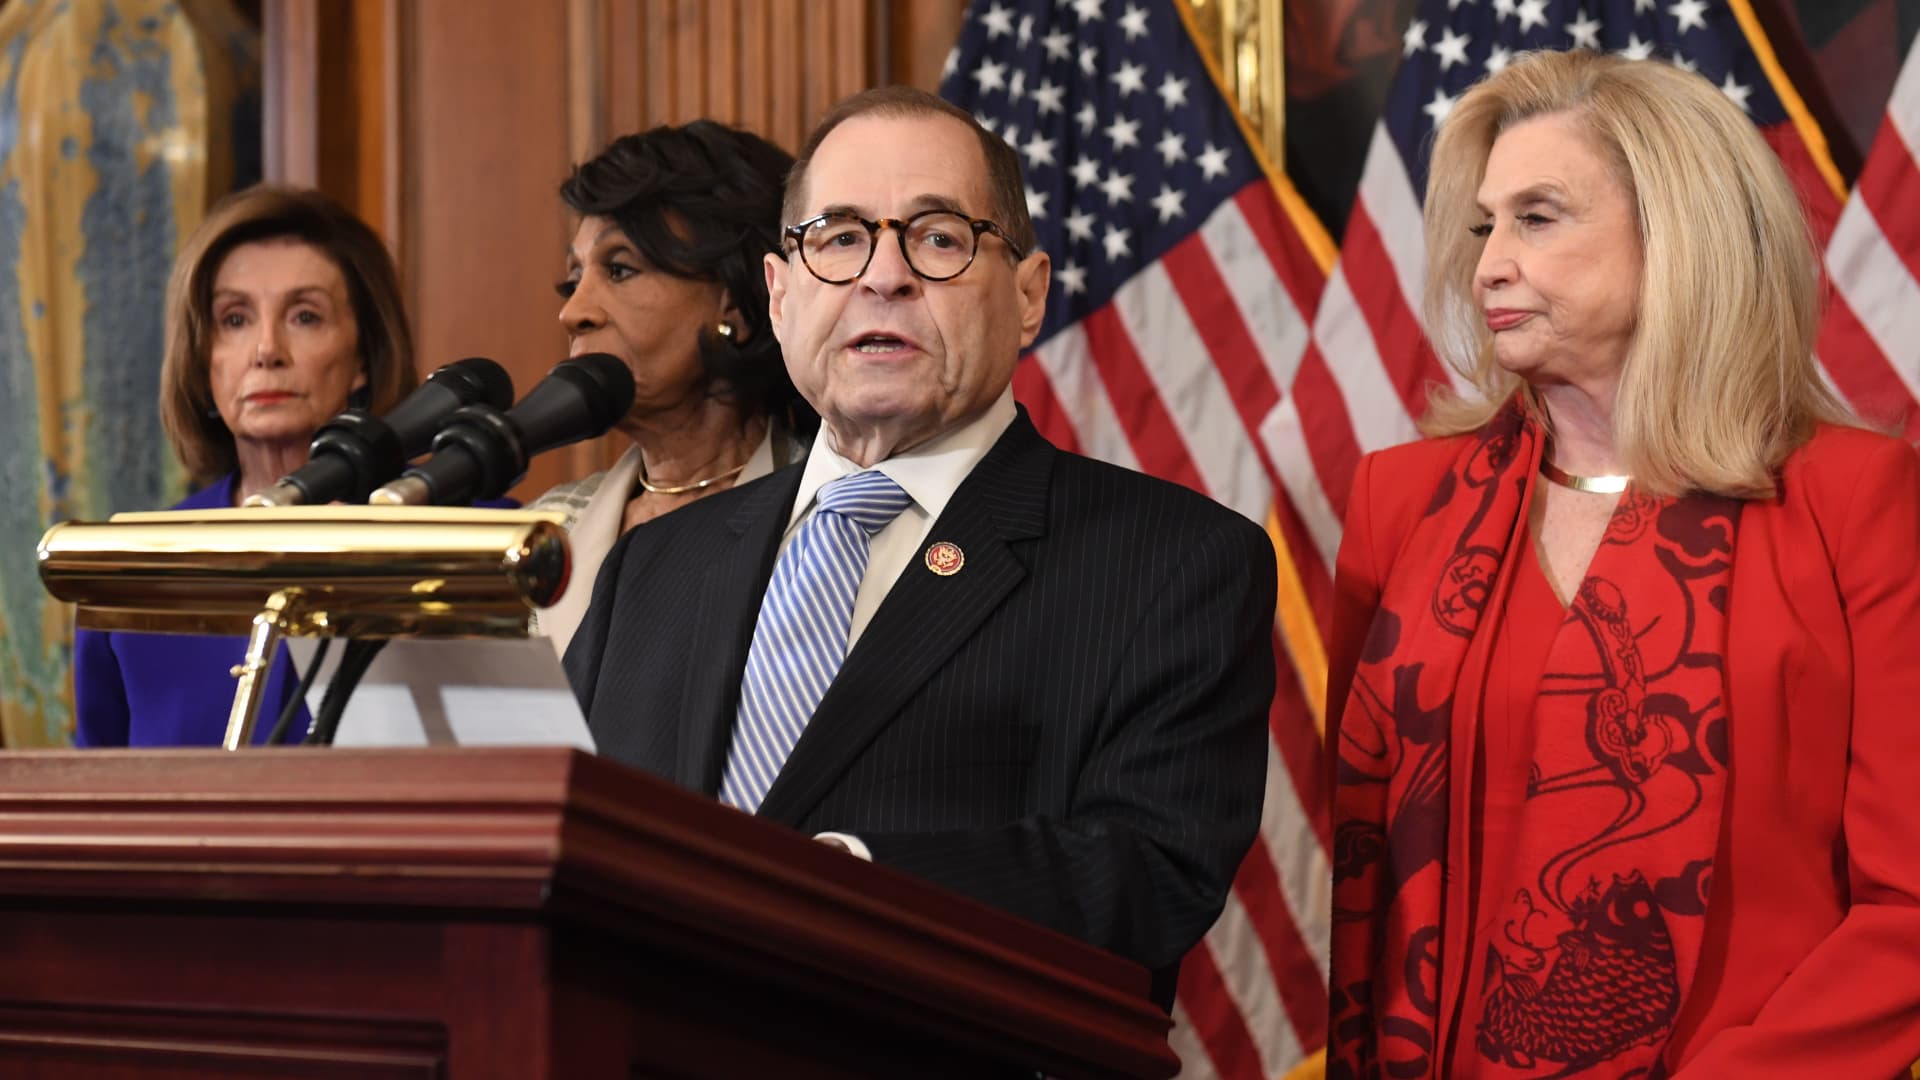 NYC’s wealthy Democrats forced to pick sides in ‘awkward’ primary fight pitting Nadler and Maloney against each other